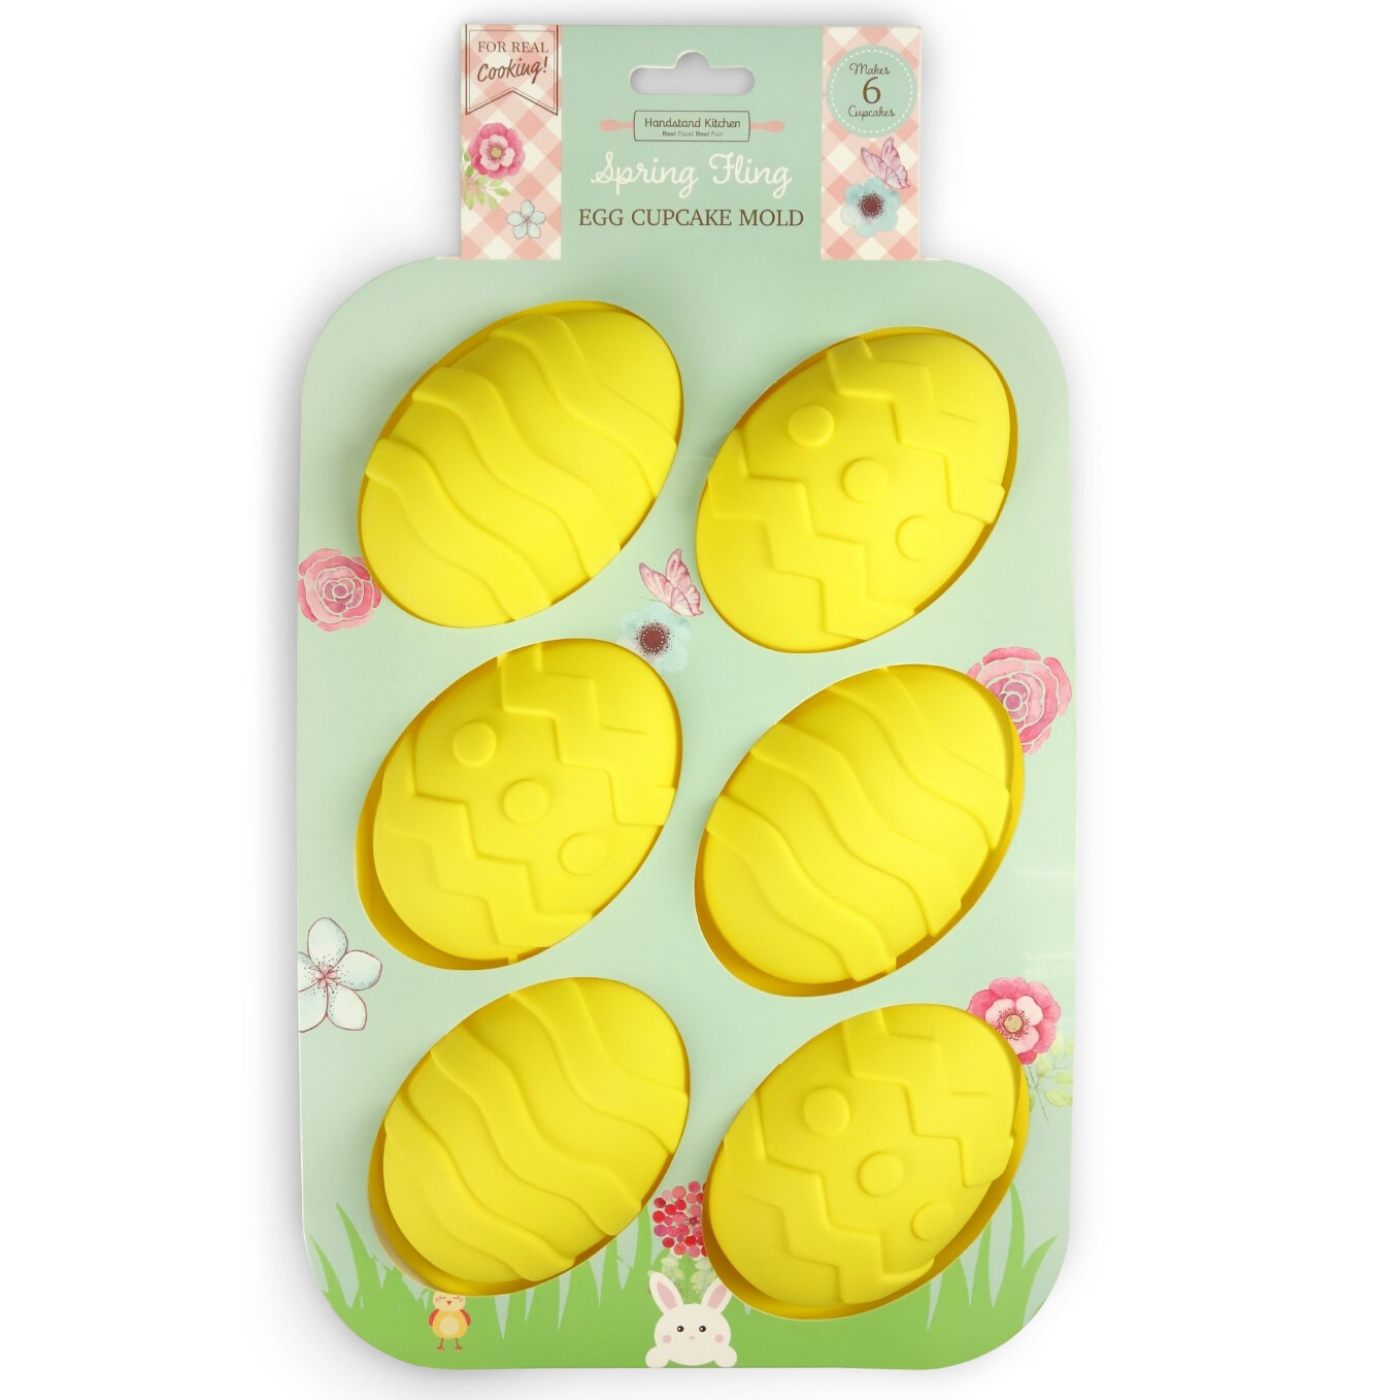 Spring Fling Silicone Cupcake Mold Egg Shaped Easter Cupcakes